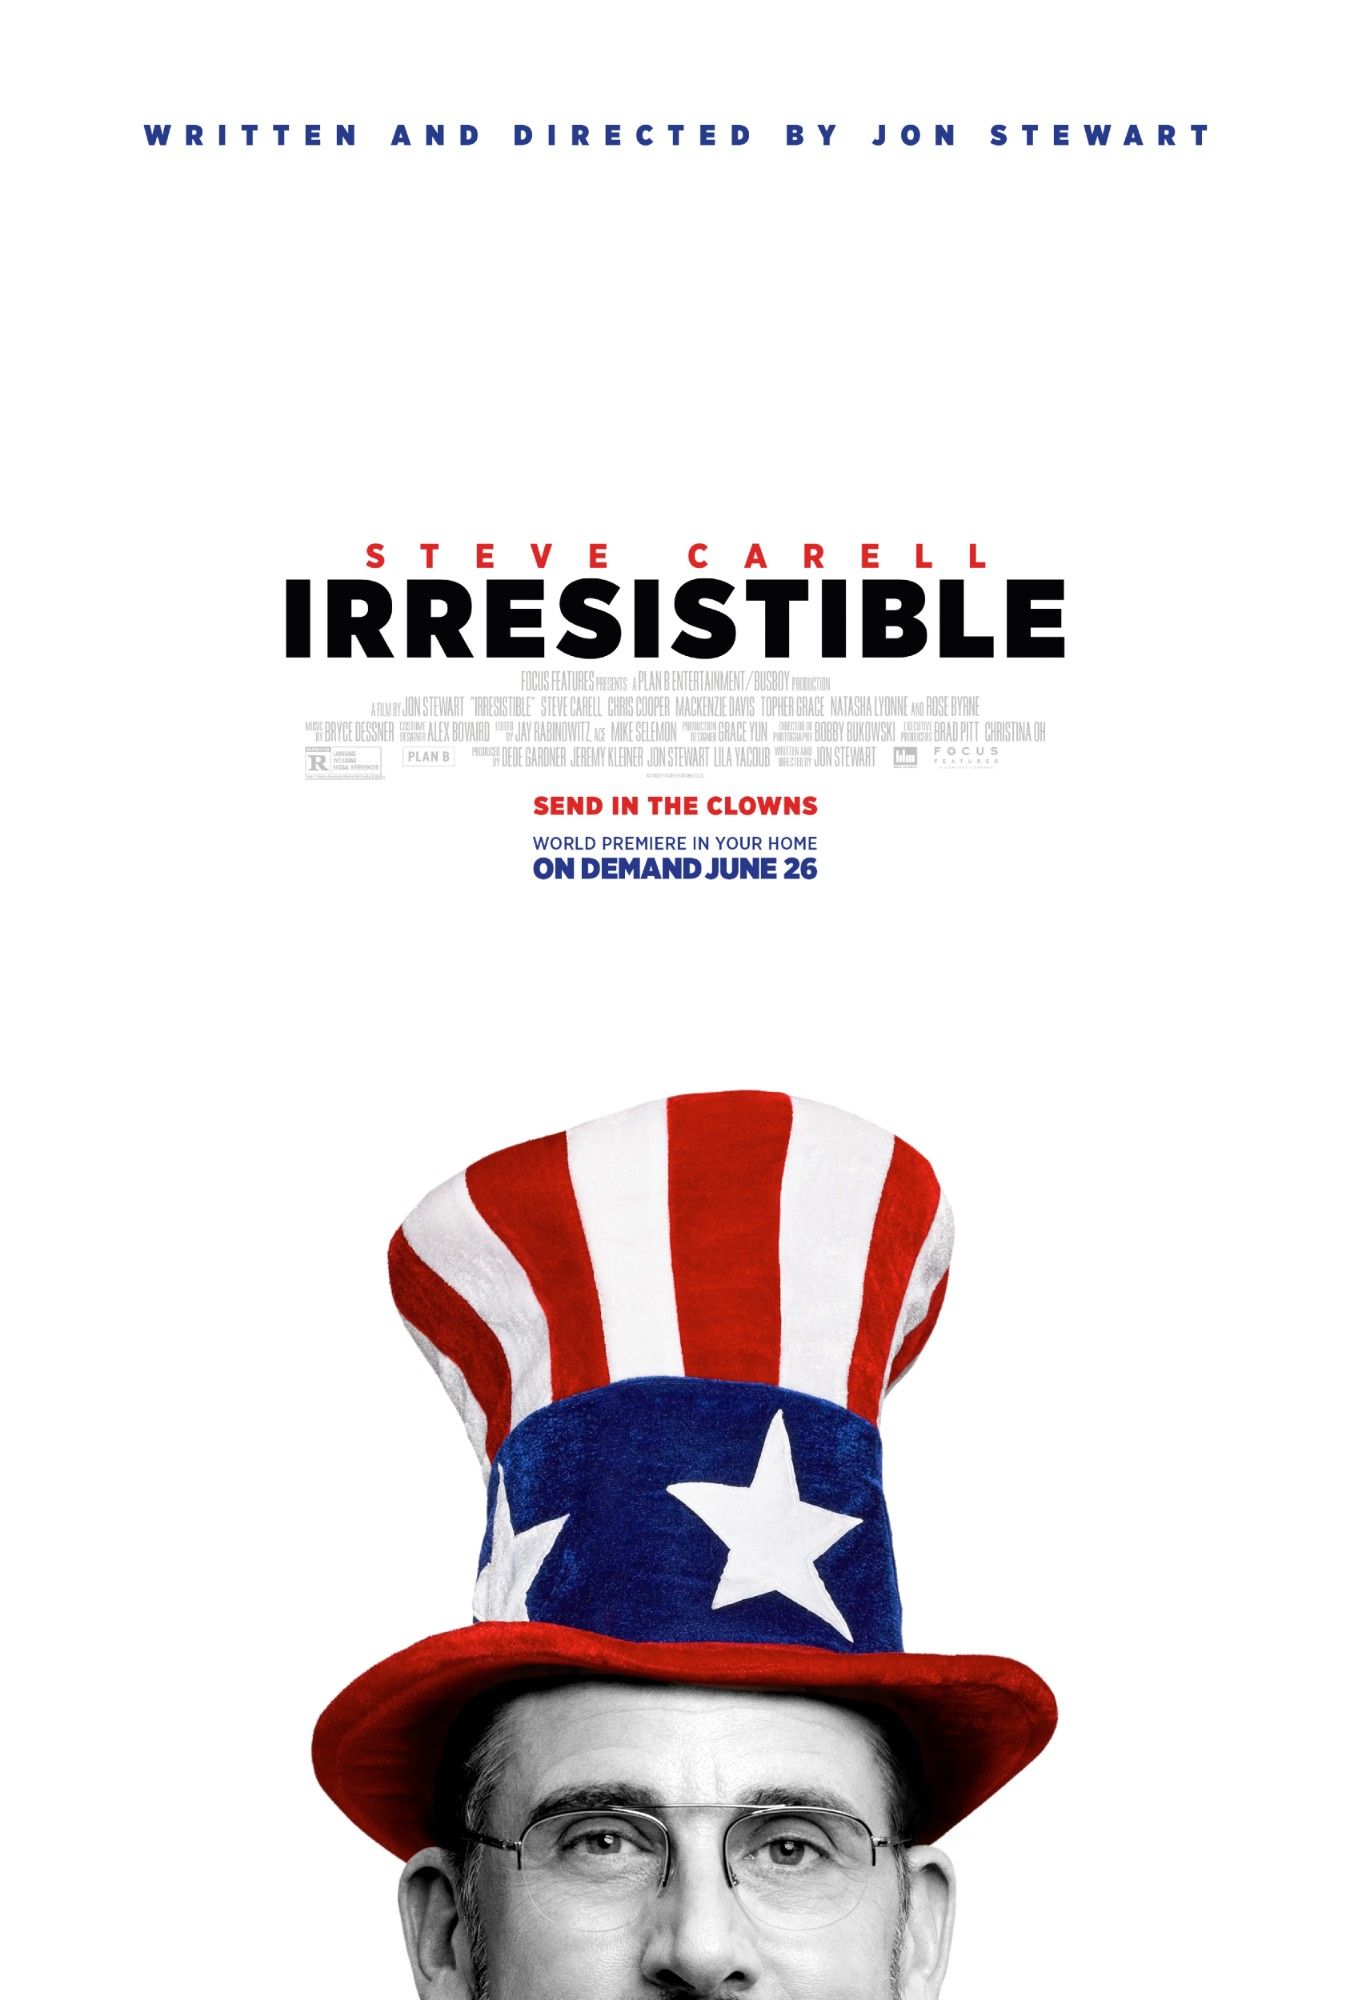 Irresistible Movie Poster Reveals New Release Date